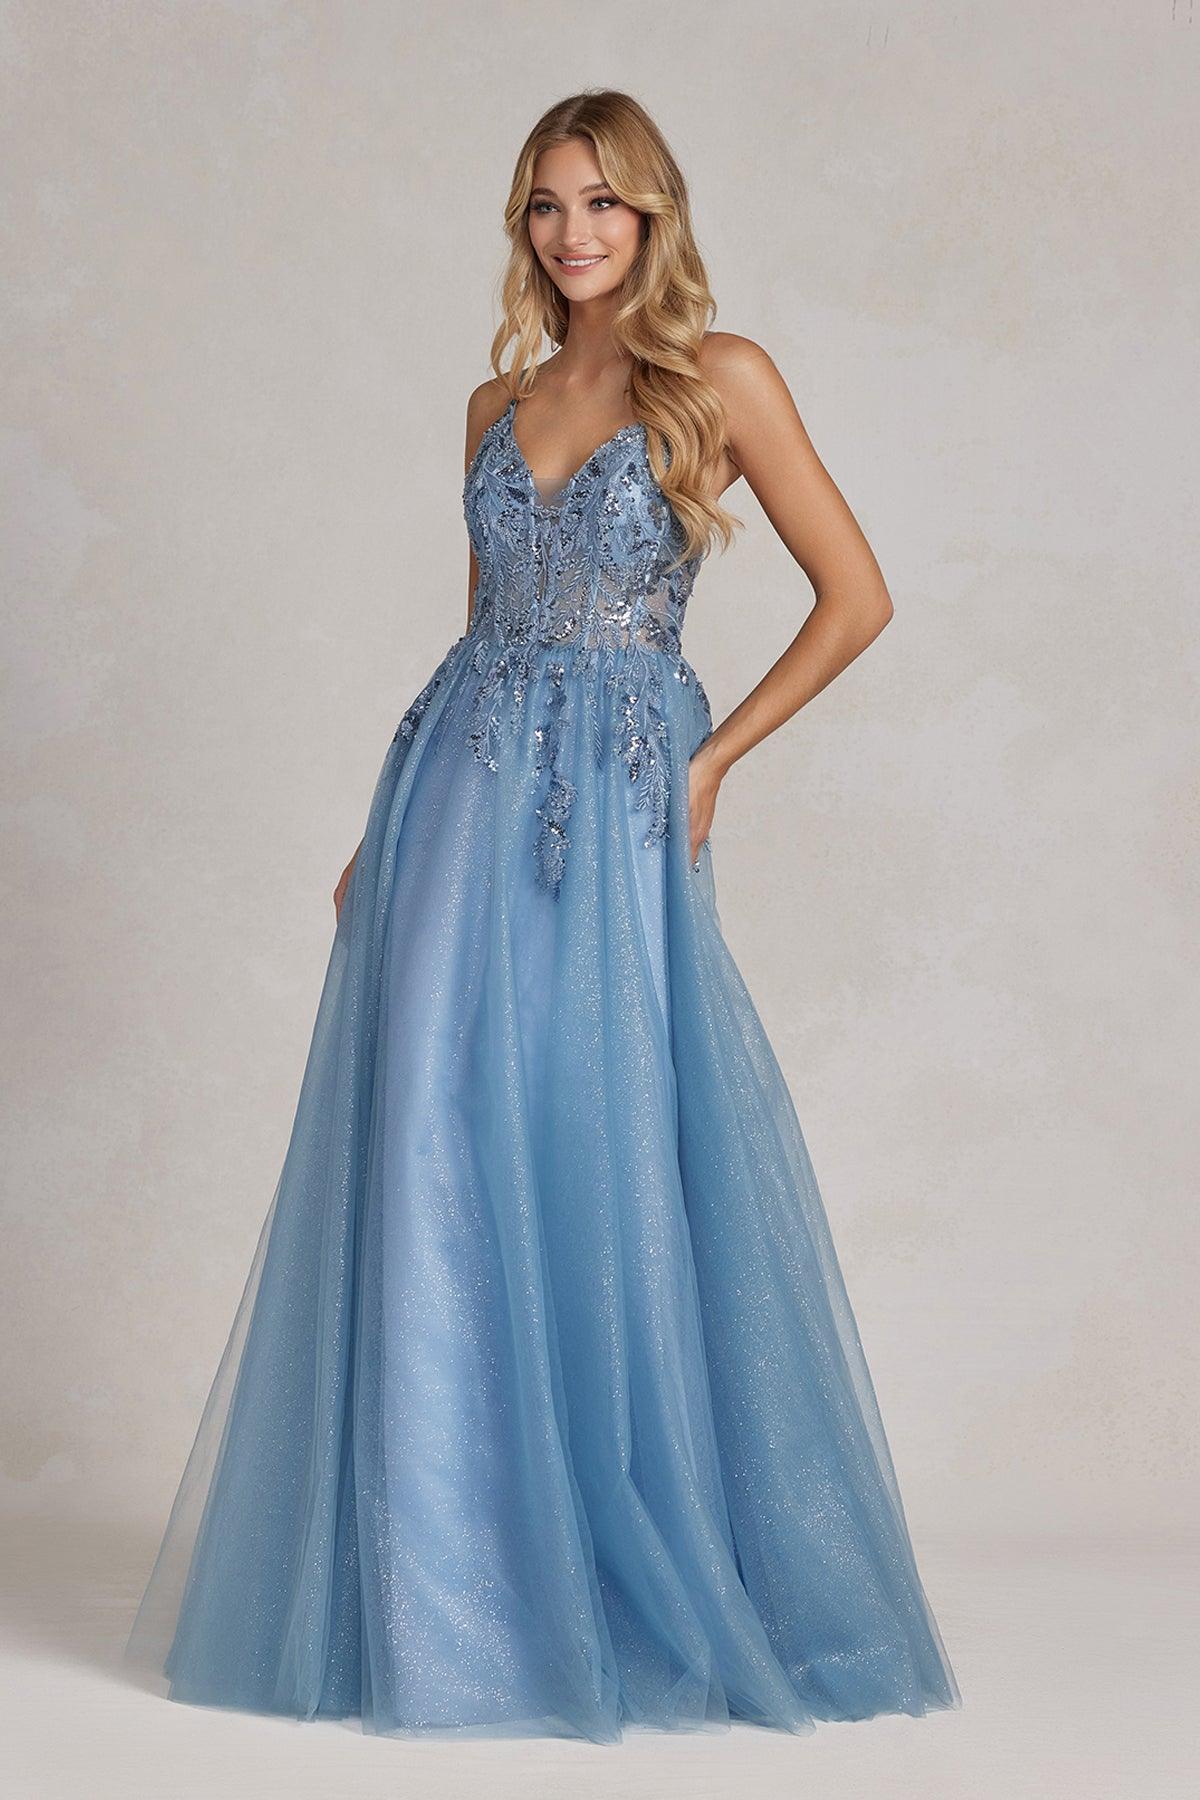 Nox Anabel E1125 Long Spaghetti Strap A Line Prom Gown Dusty Blue